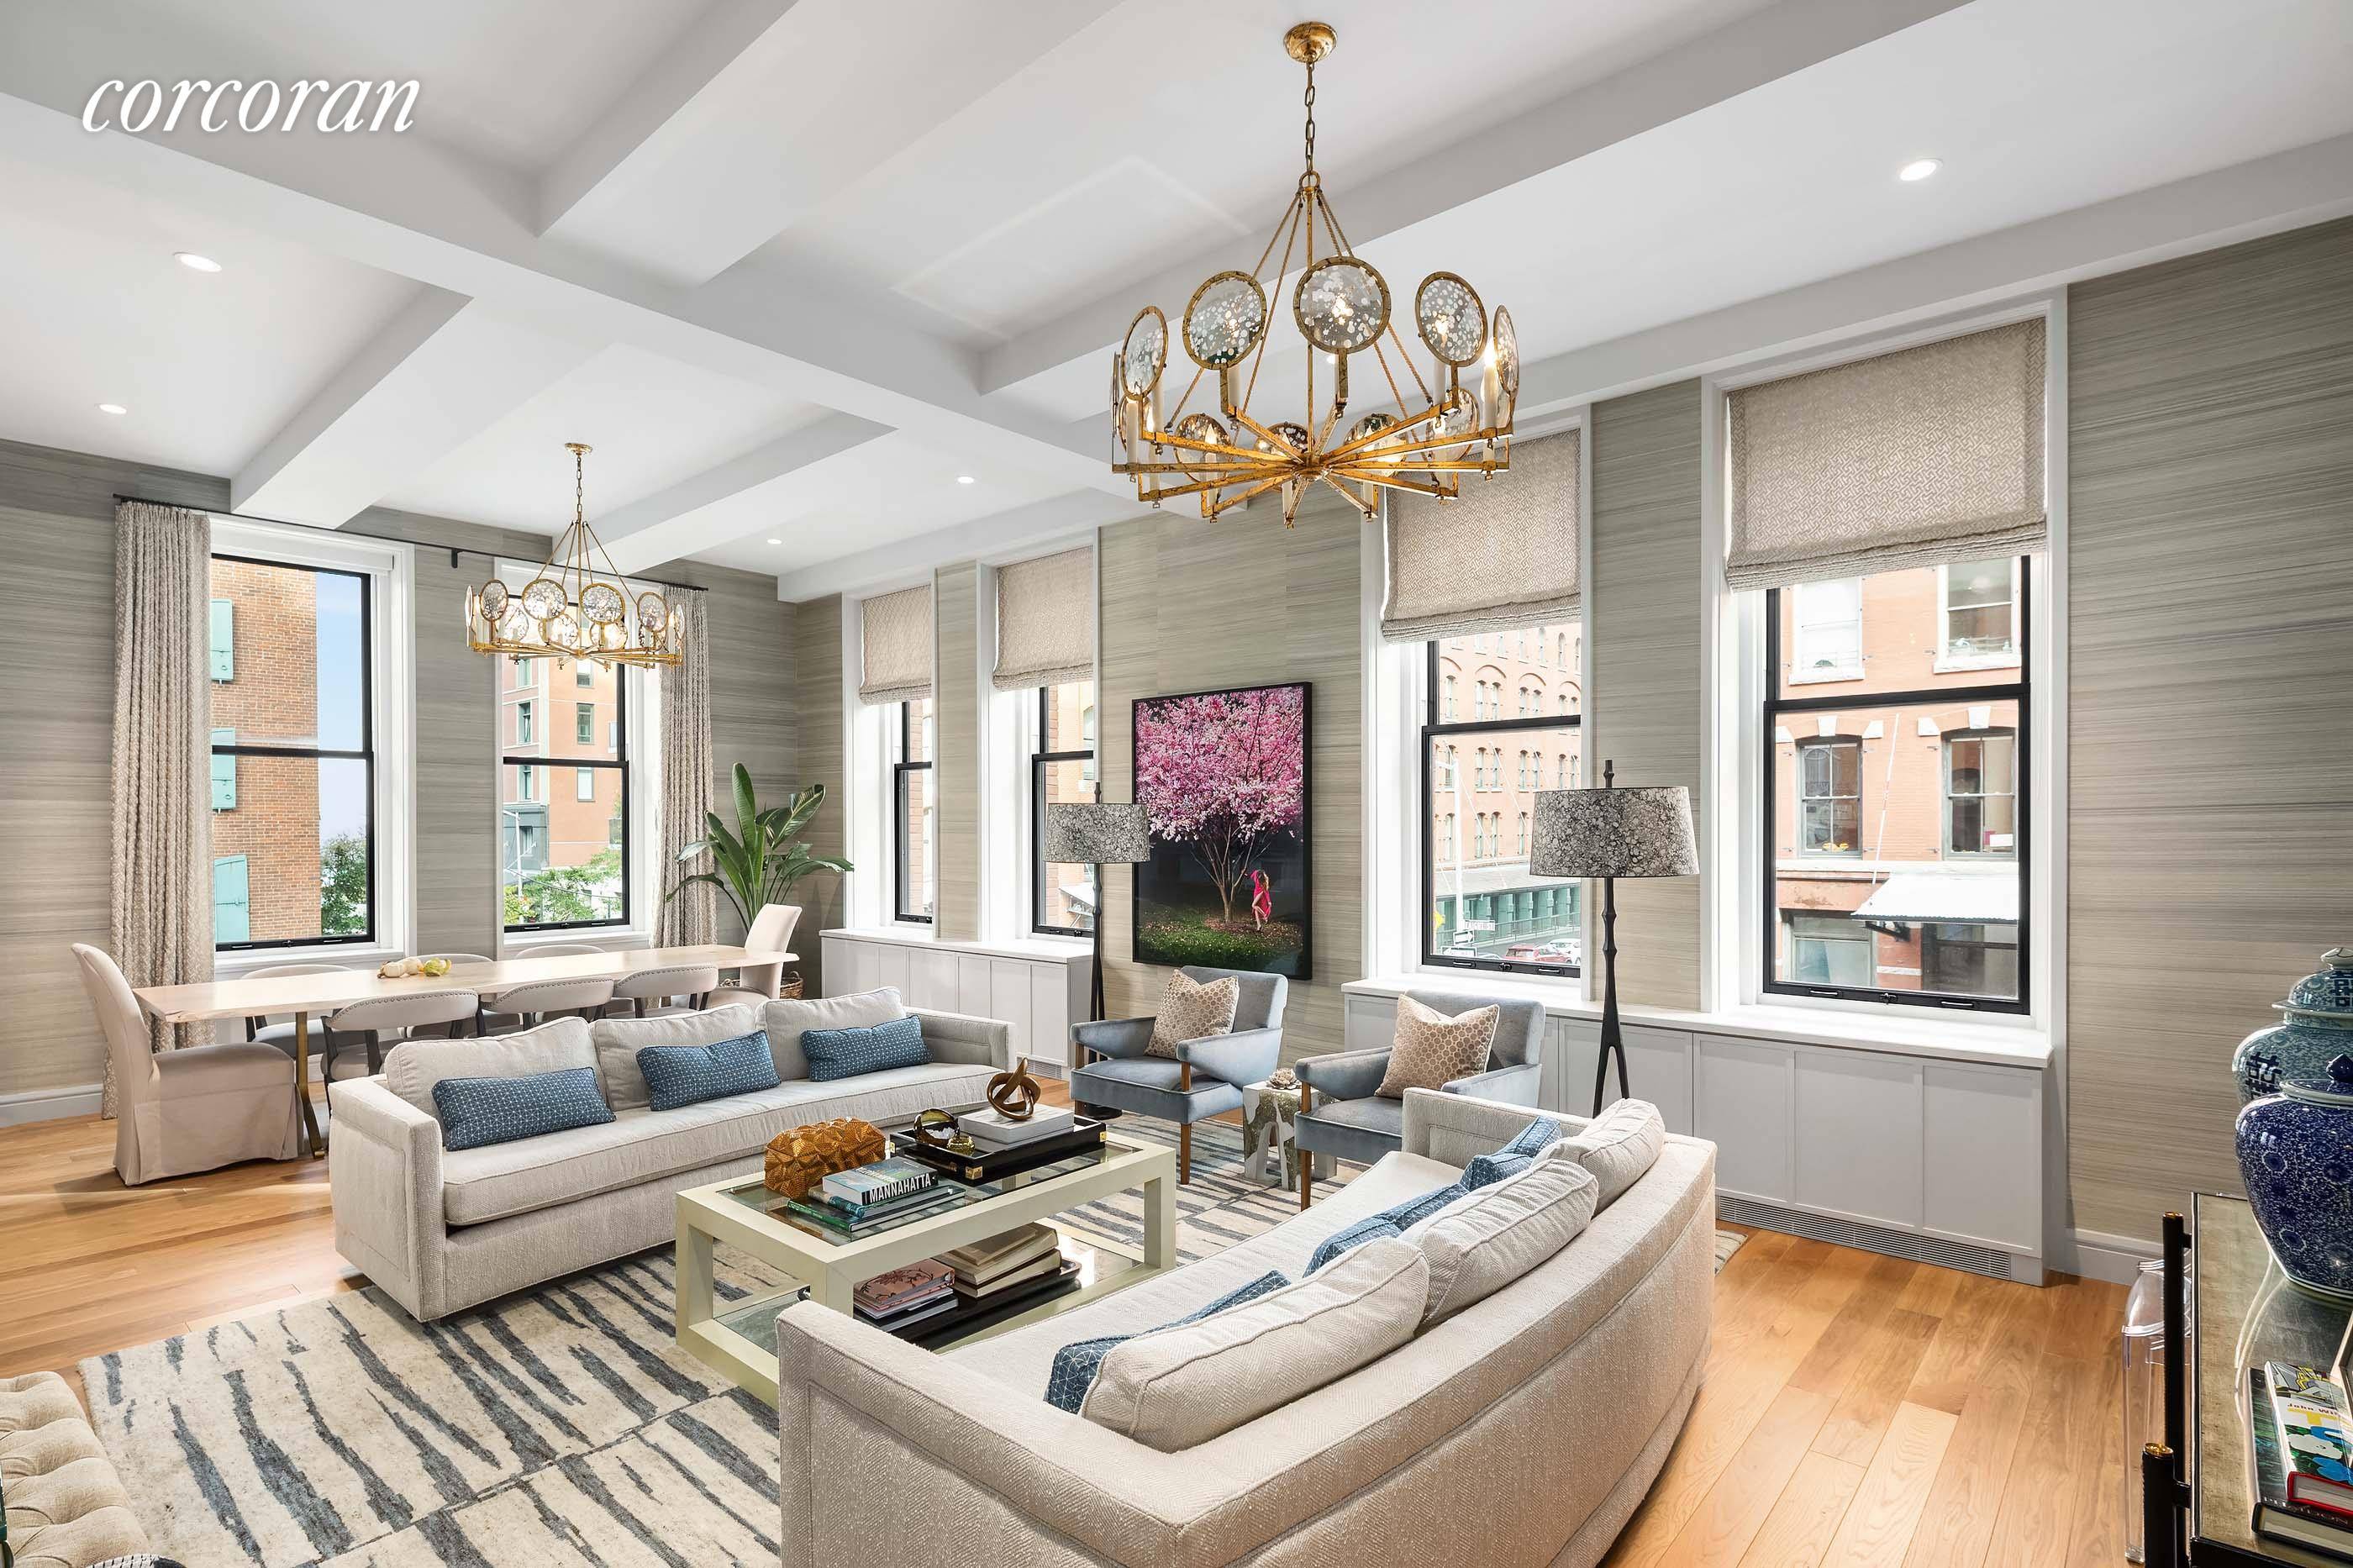 One of the best homes available in Tribeca right now, this outstanding five bedroom, five and a half bathroom loft offers impeccable designer style and expansive living space in a ...